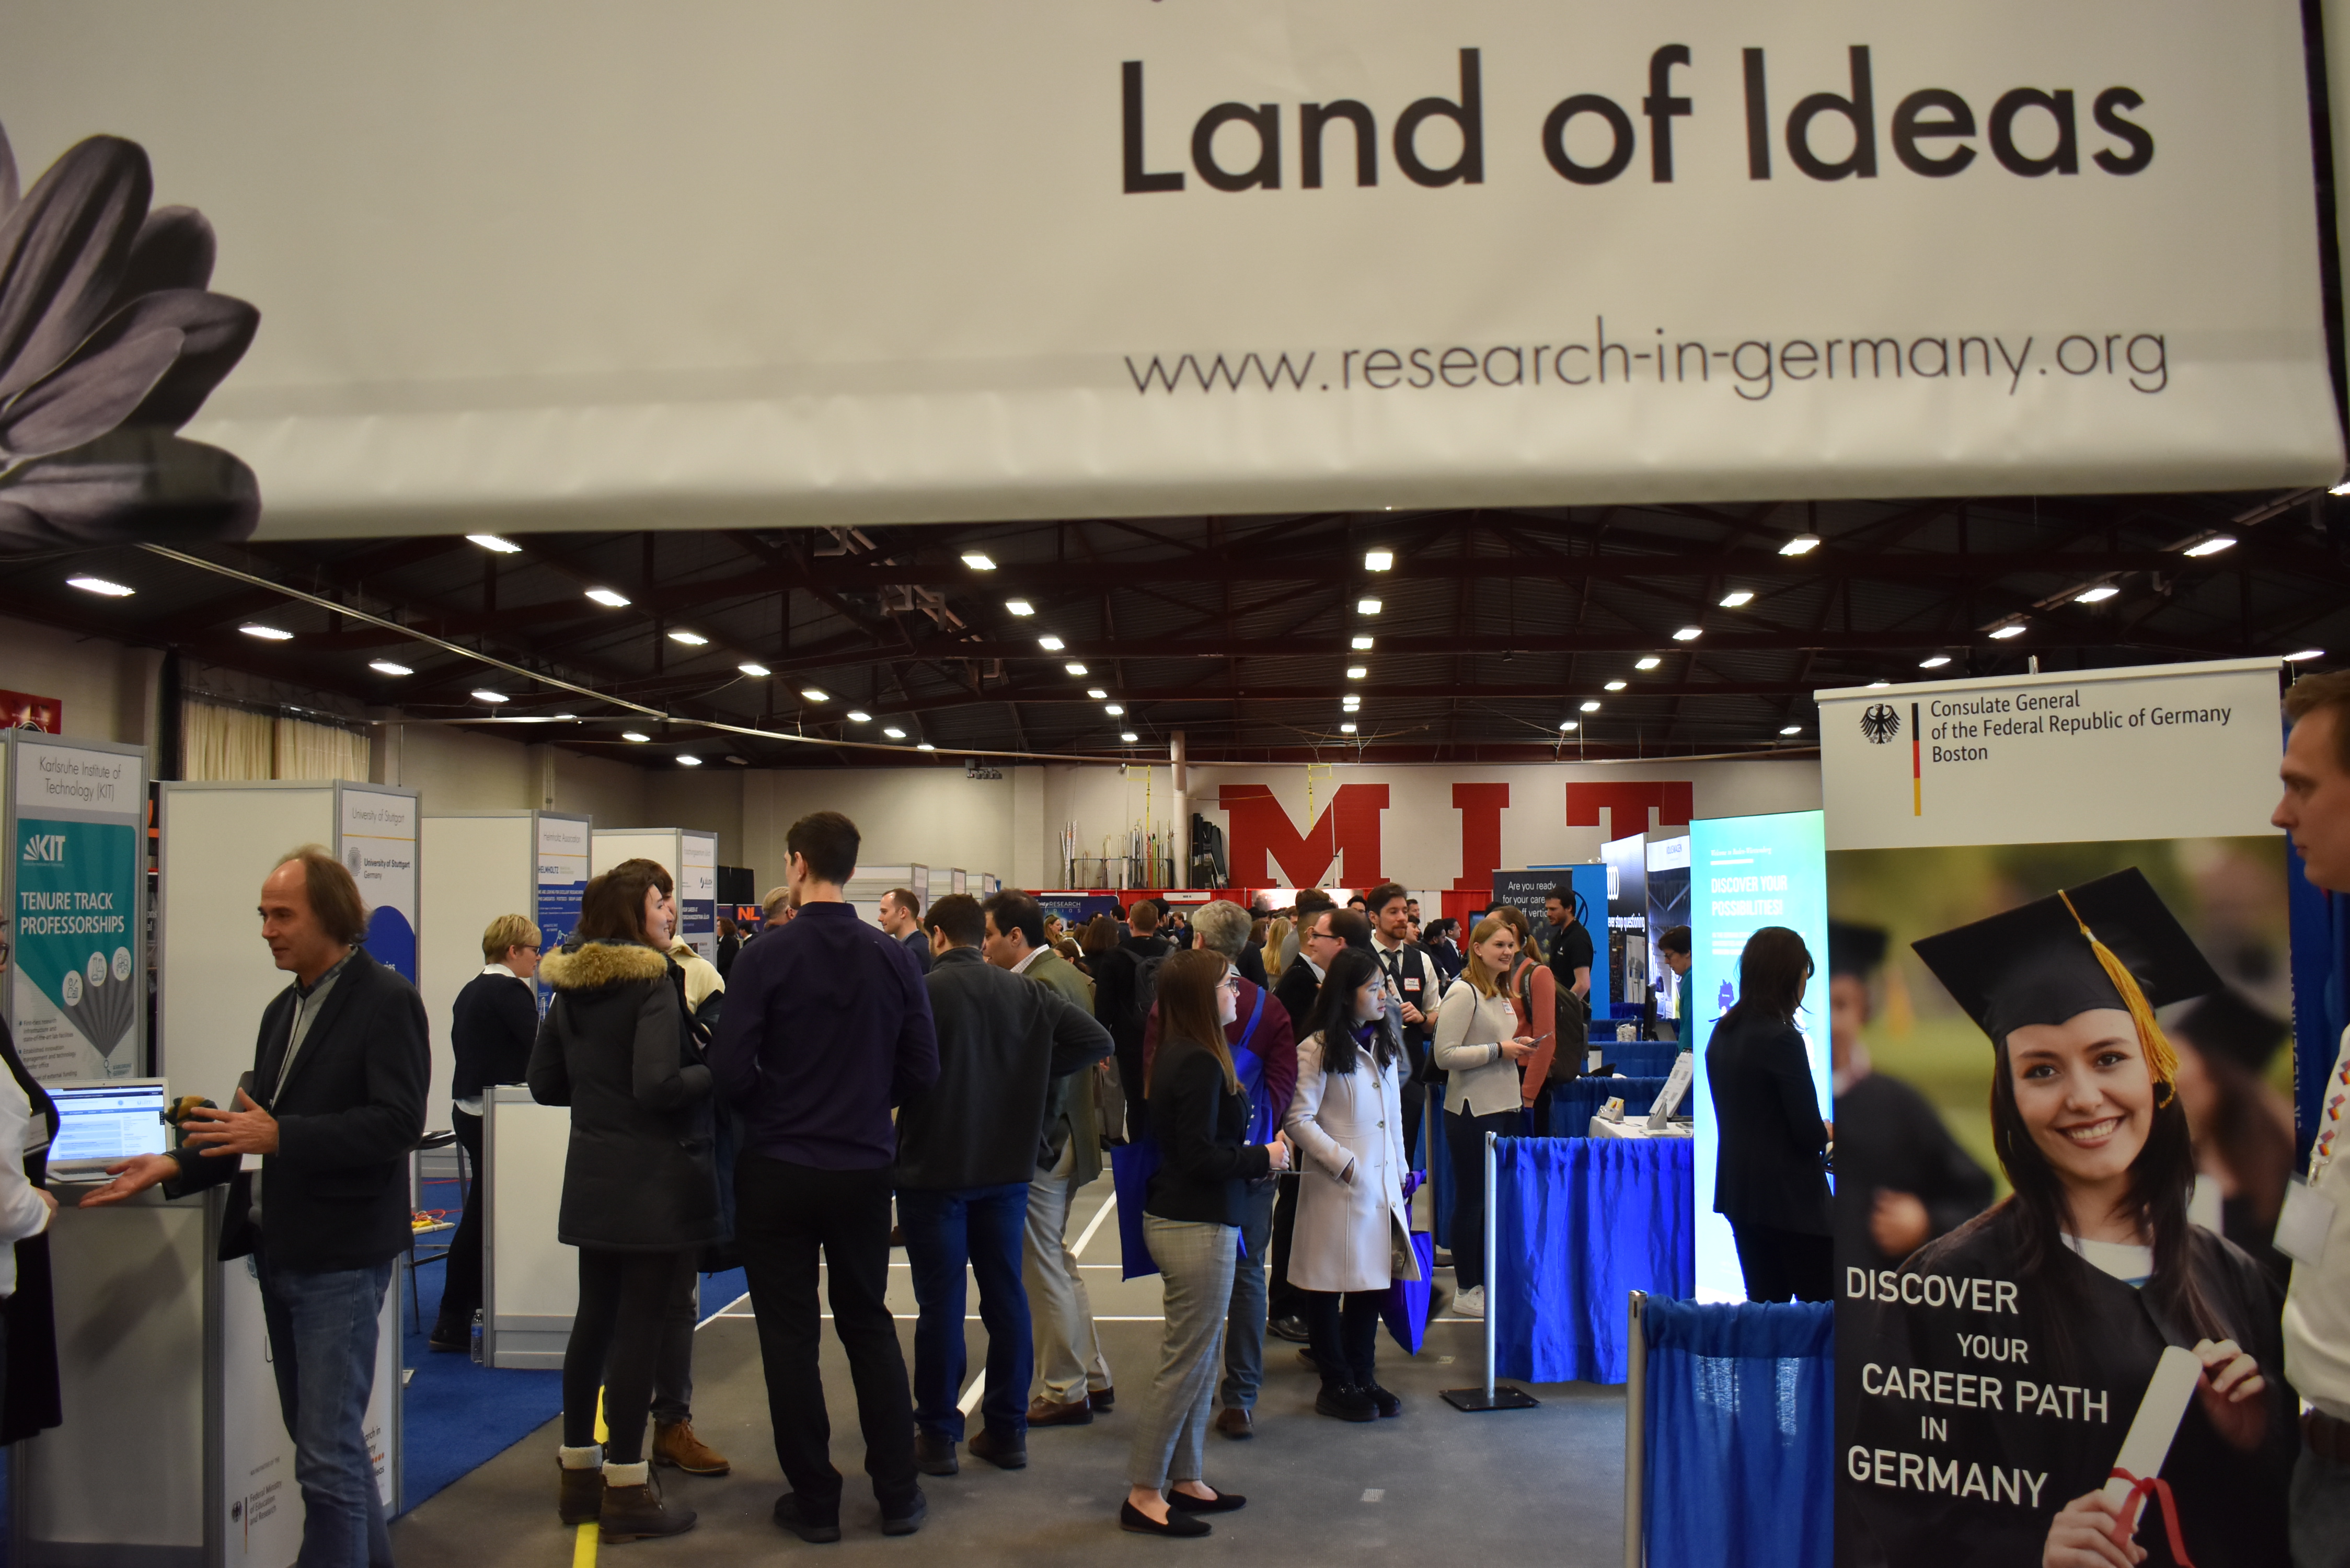 The Research in Germany initiative had a strong presence at the career fair